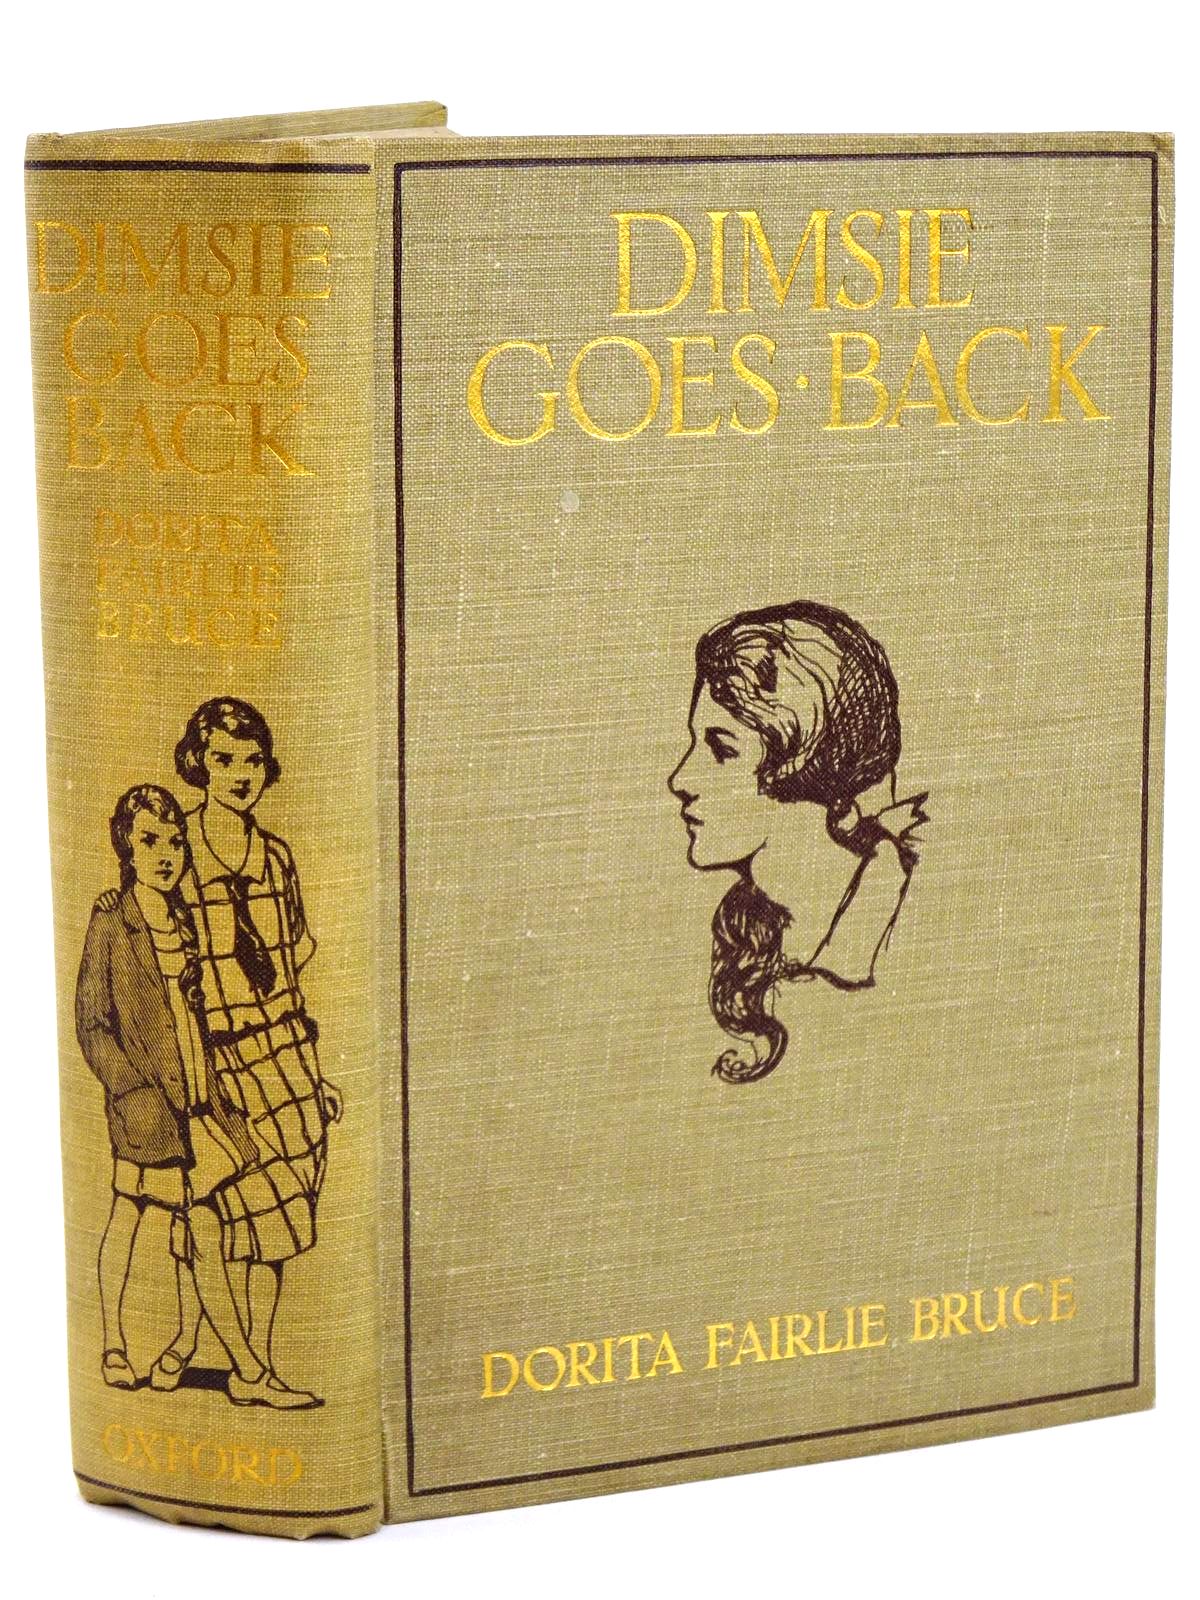 Photo of DIMSIE GOES BACK written by Bruce, Dorita Fairlie illustrated by Reeve, Mary Strange published by Oxford University Press, Humphrey Milford (STOCK CODE: 1318078)  for sale by Stella & Rose's Books